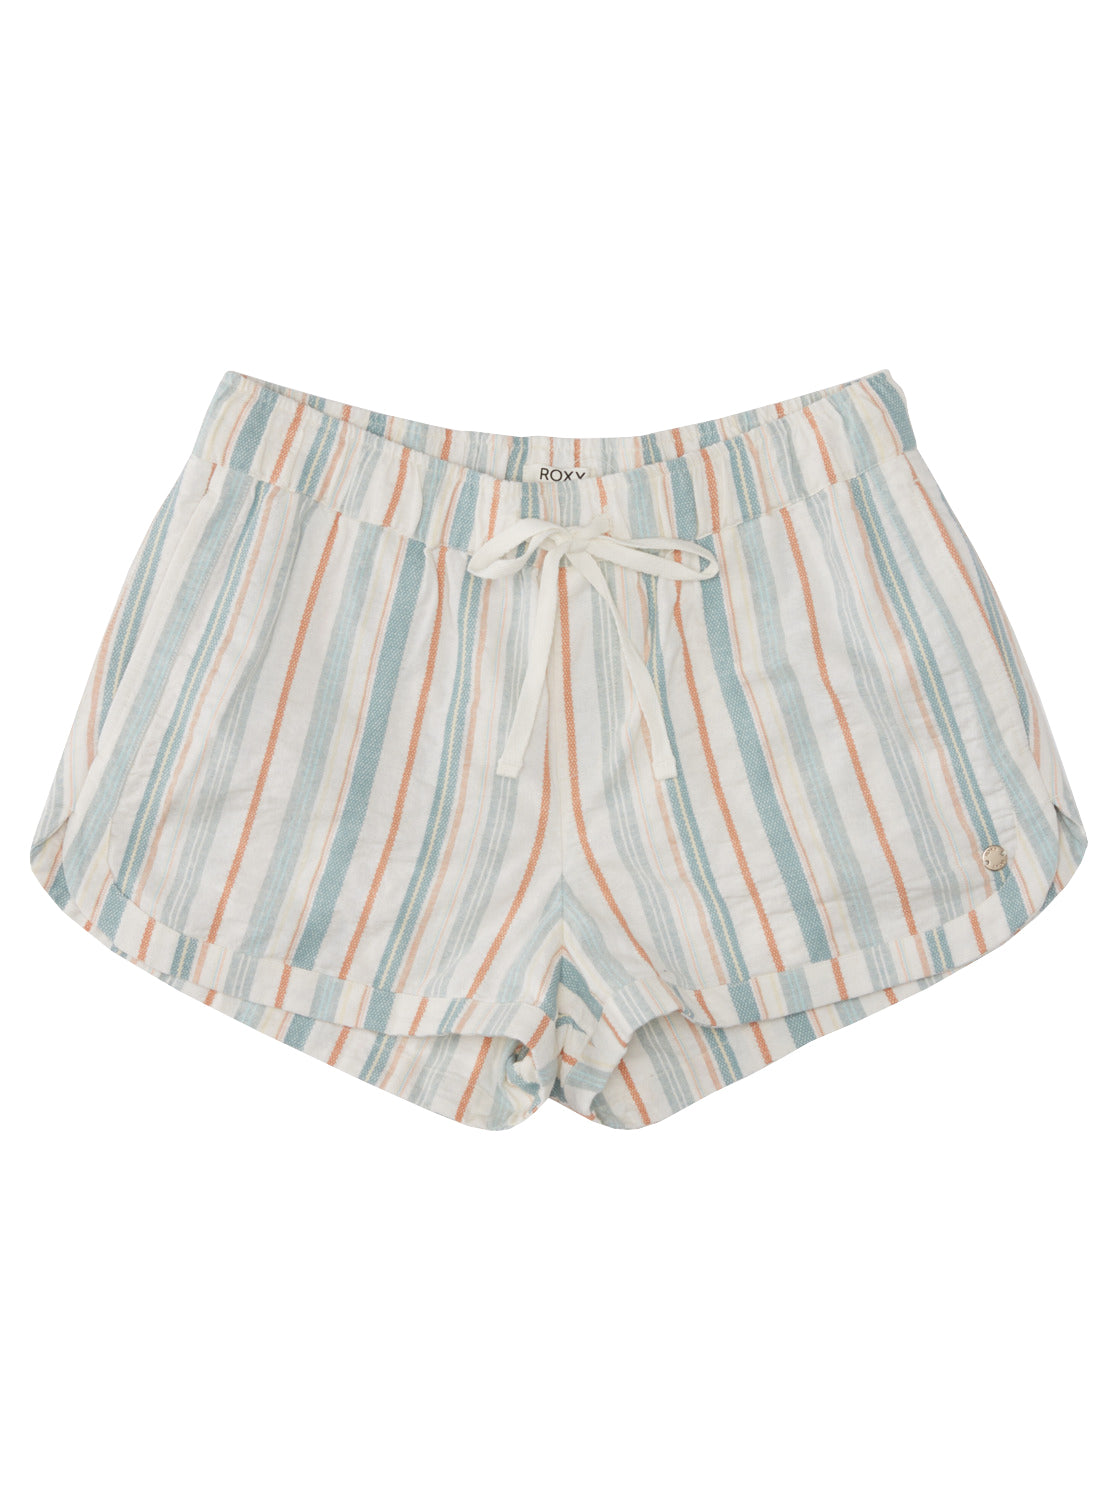 Roxy New Impossible Love YD Short WBK3 S